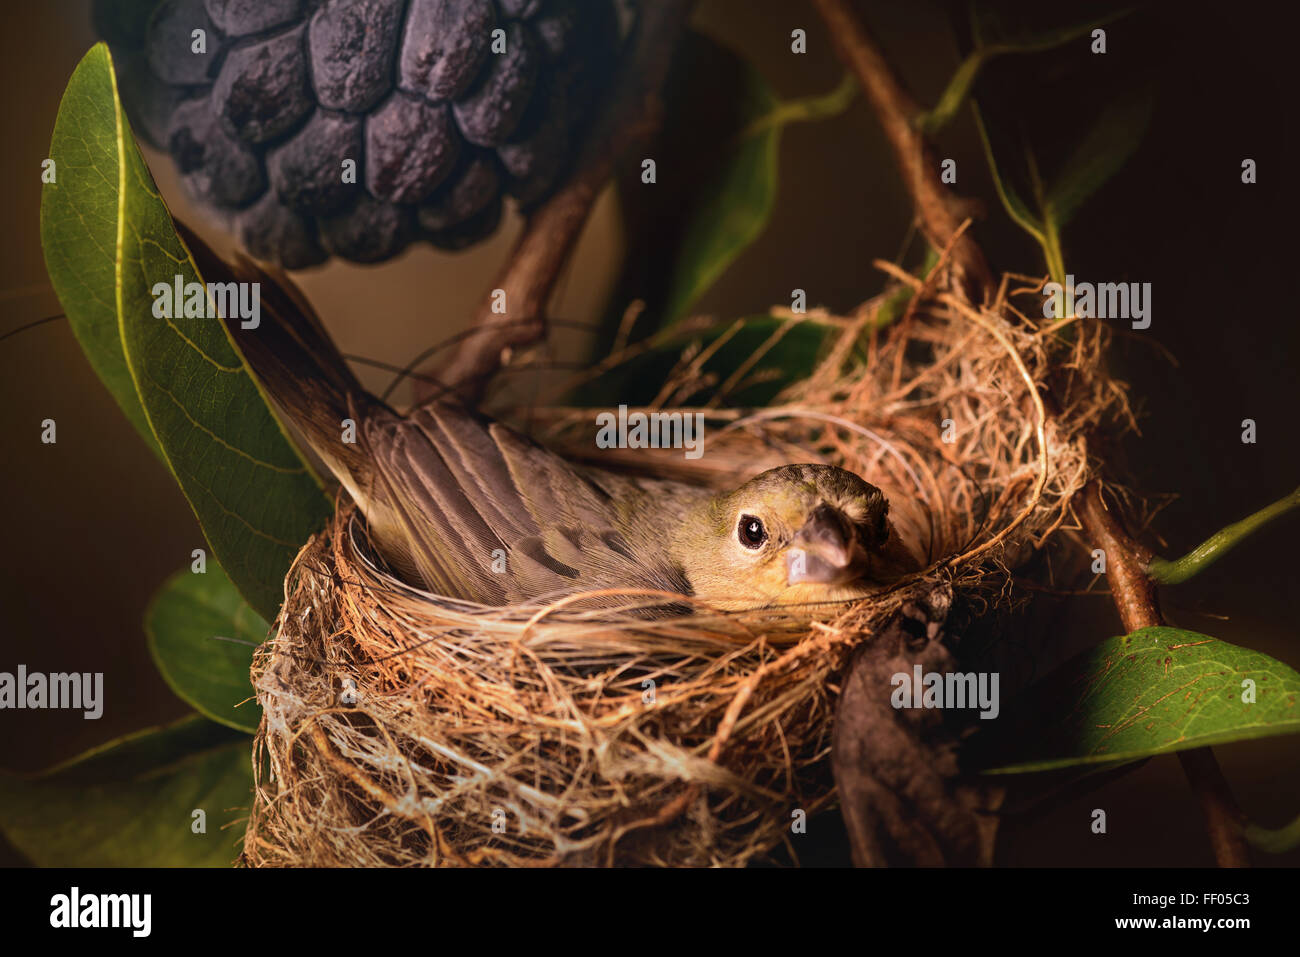 Mother bird caring for the eggs in the nest of a tree. Stock Photo